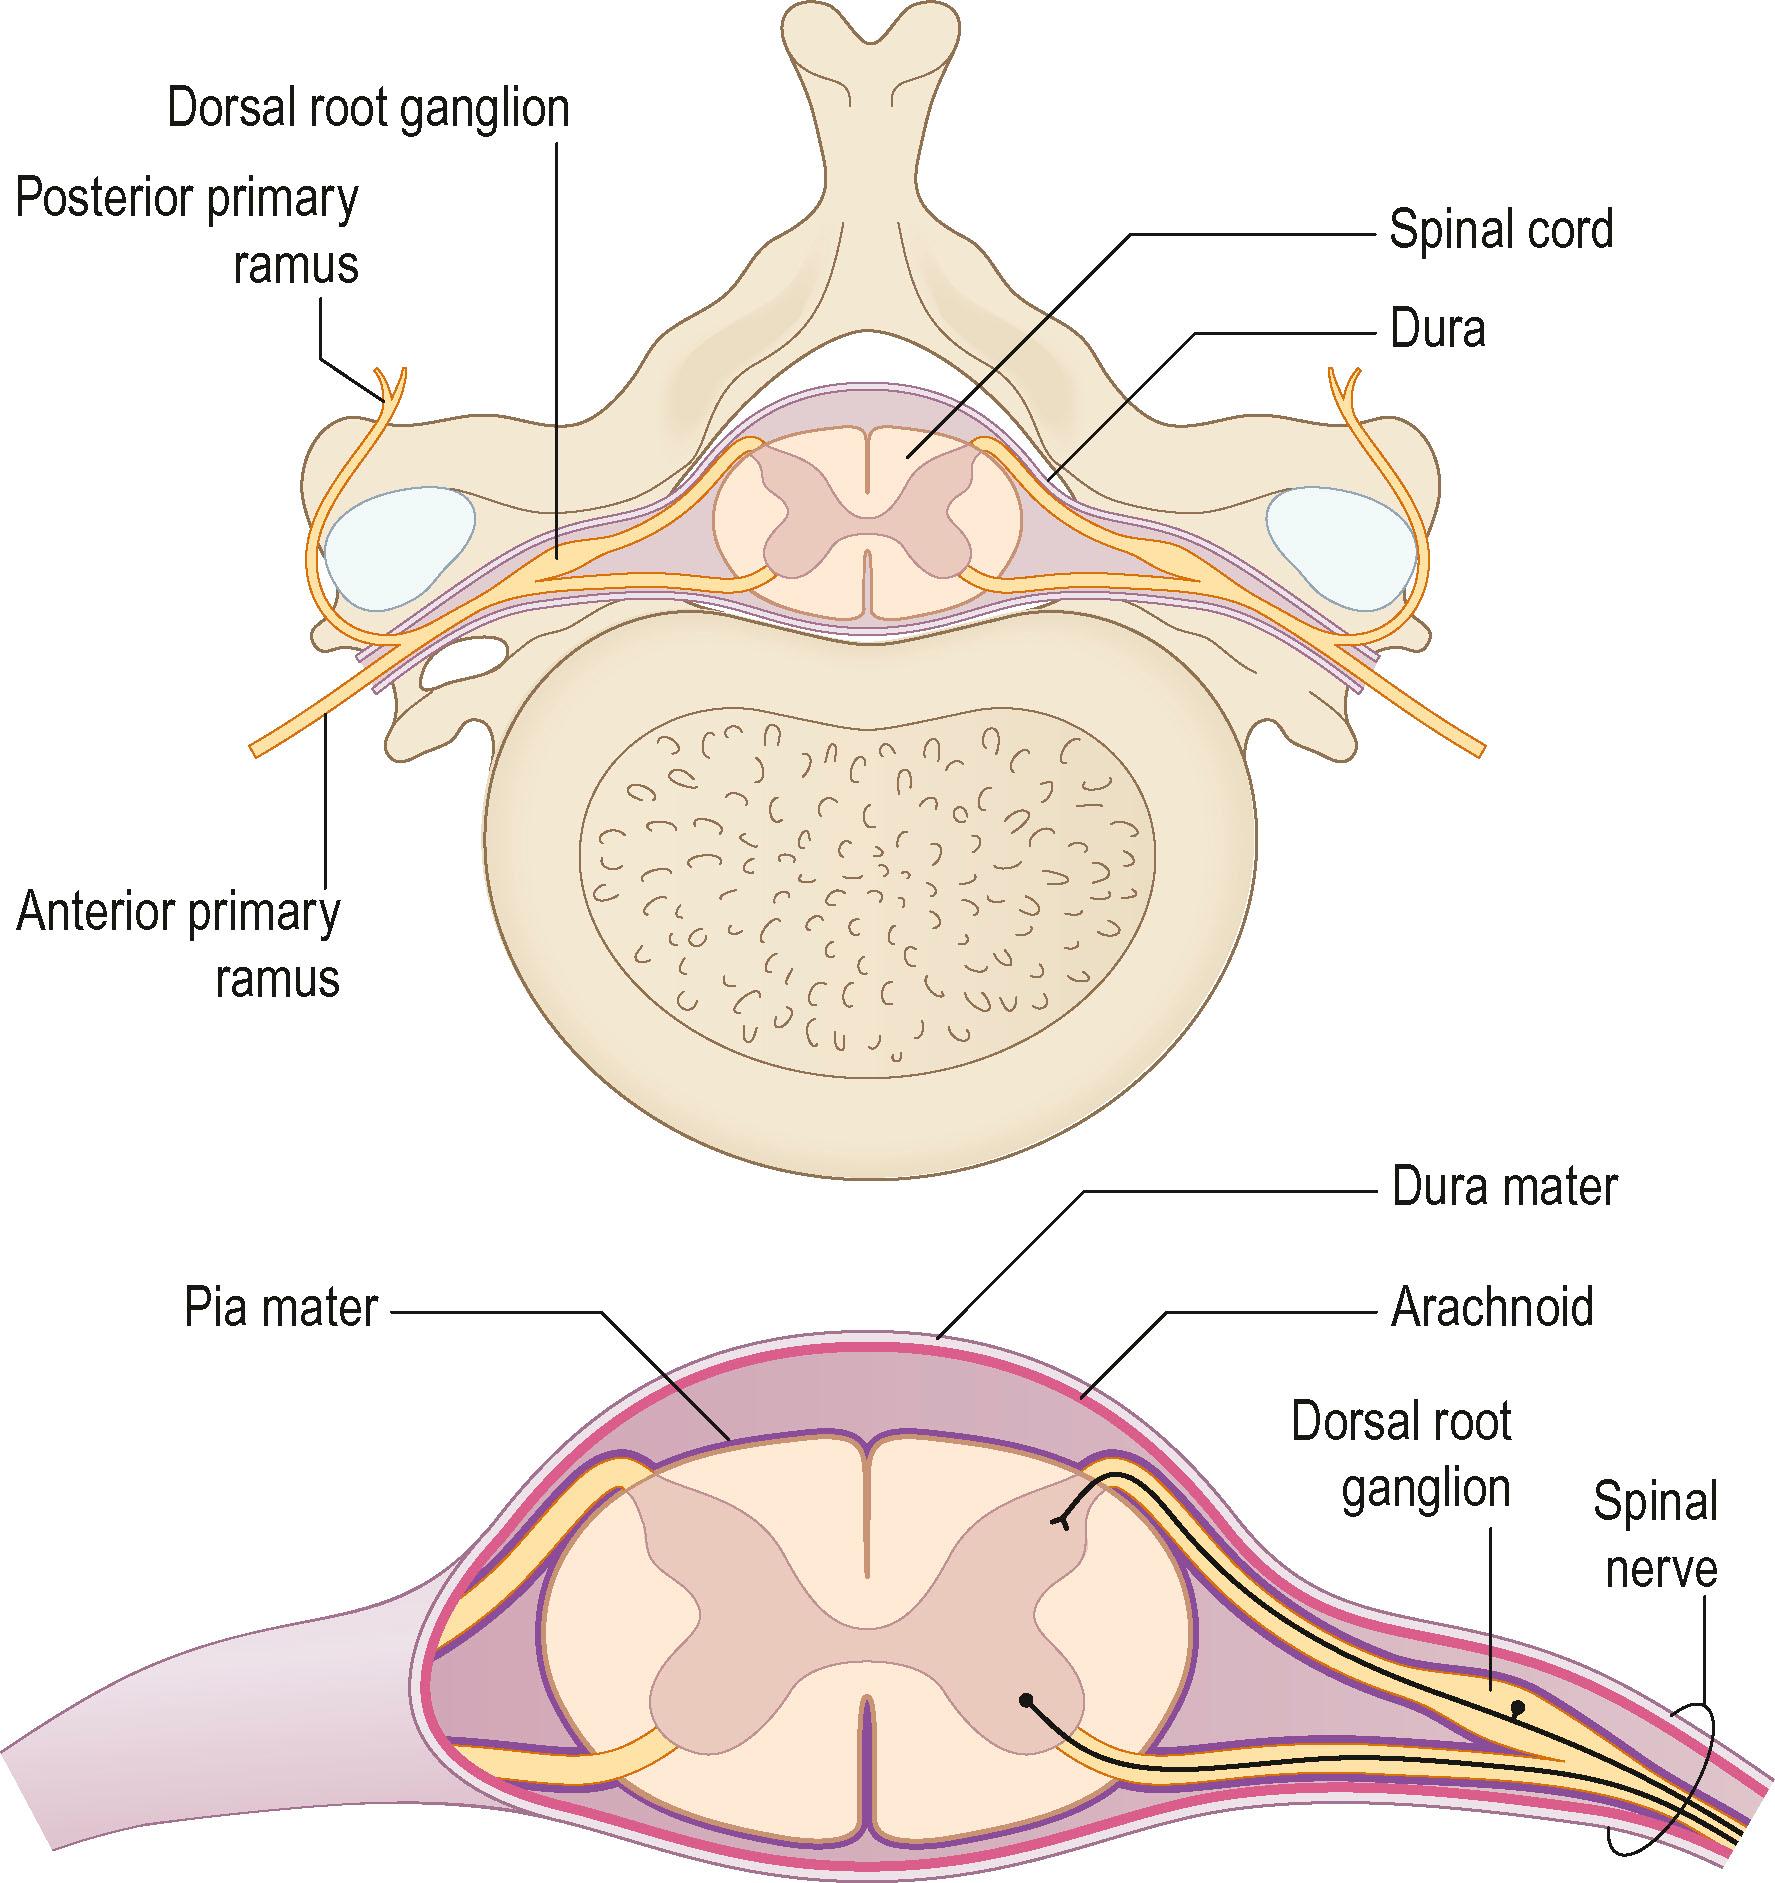 Figure 22.1, The anterior and posterior nerve roots, which emerge from rootlets attached to the spinal cord.